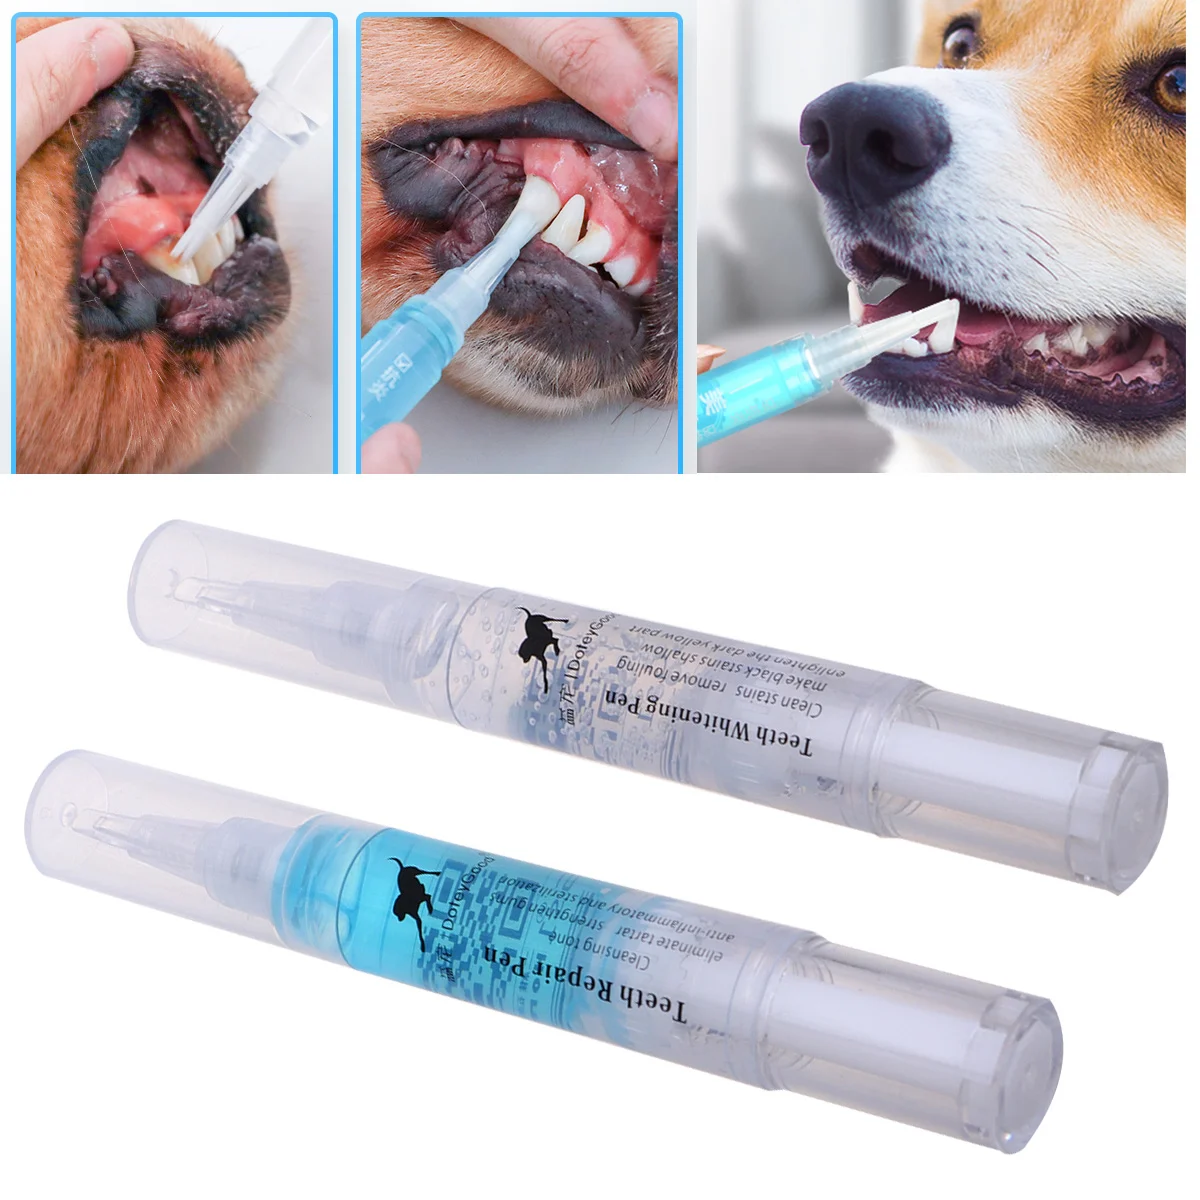 

2PCS 5ml Teeth Whitening Pen Gel Whitener Oral Hygiene Teeth Stain Cleaning Pen for Pets Dogs Cats (White)